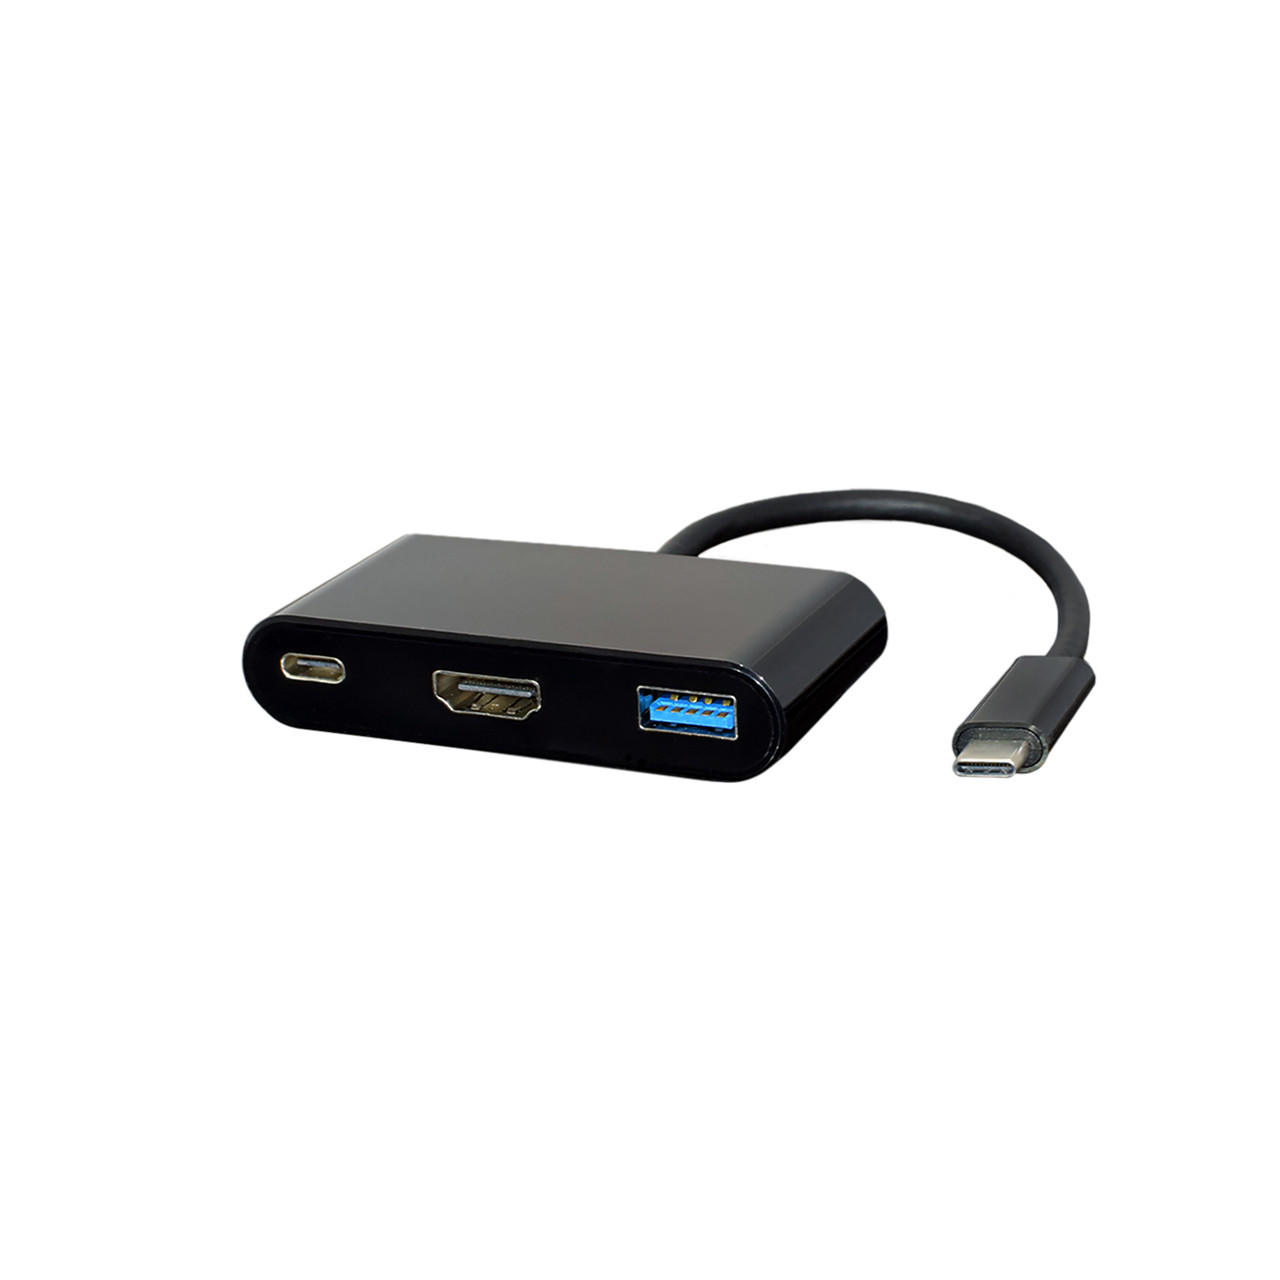 Multiport adapter (USB-C male to USB-A, USB-C and HDMI)